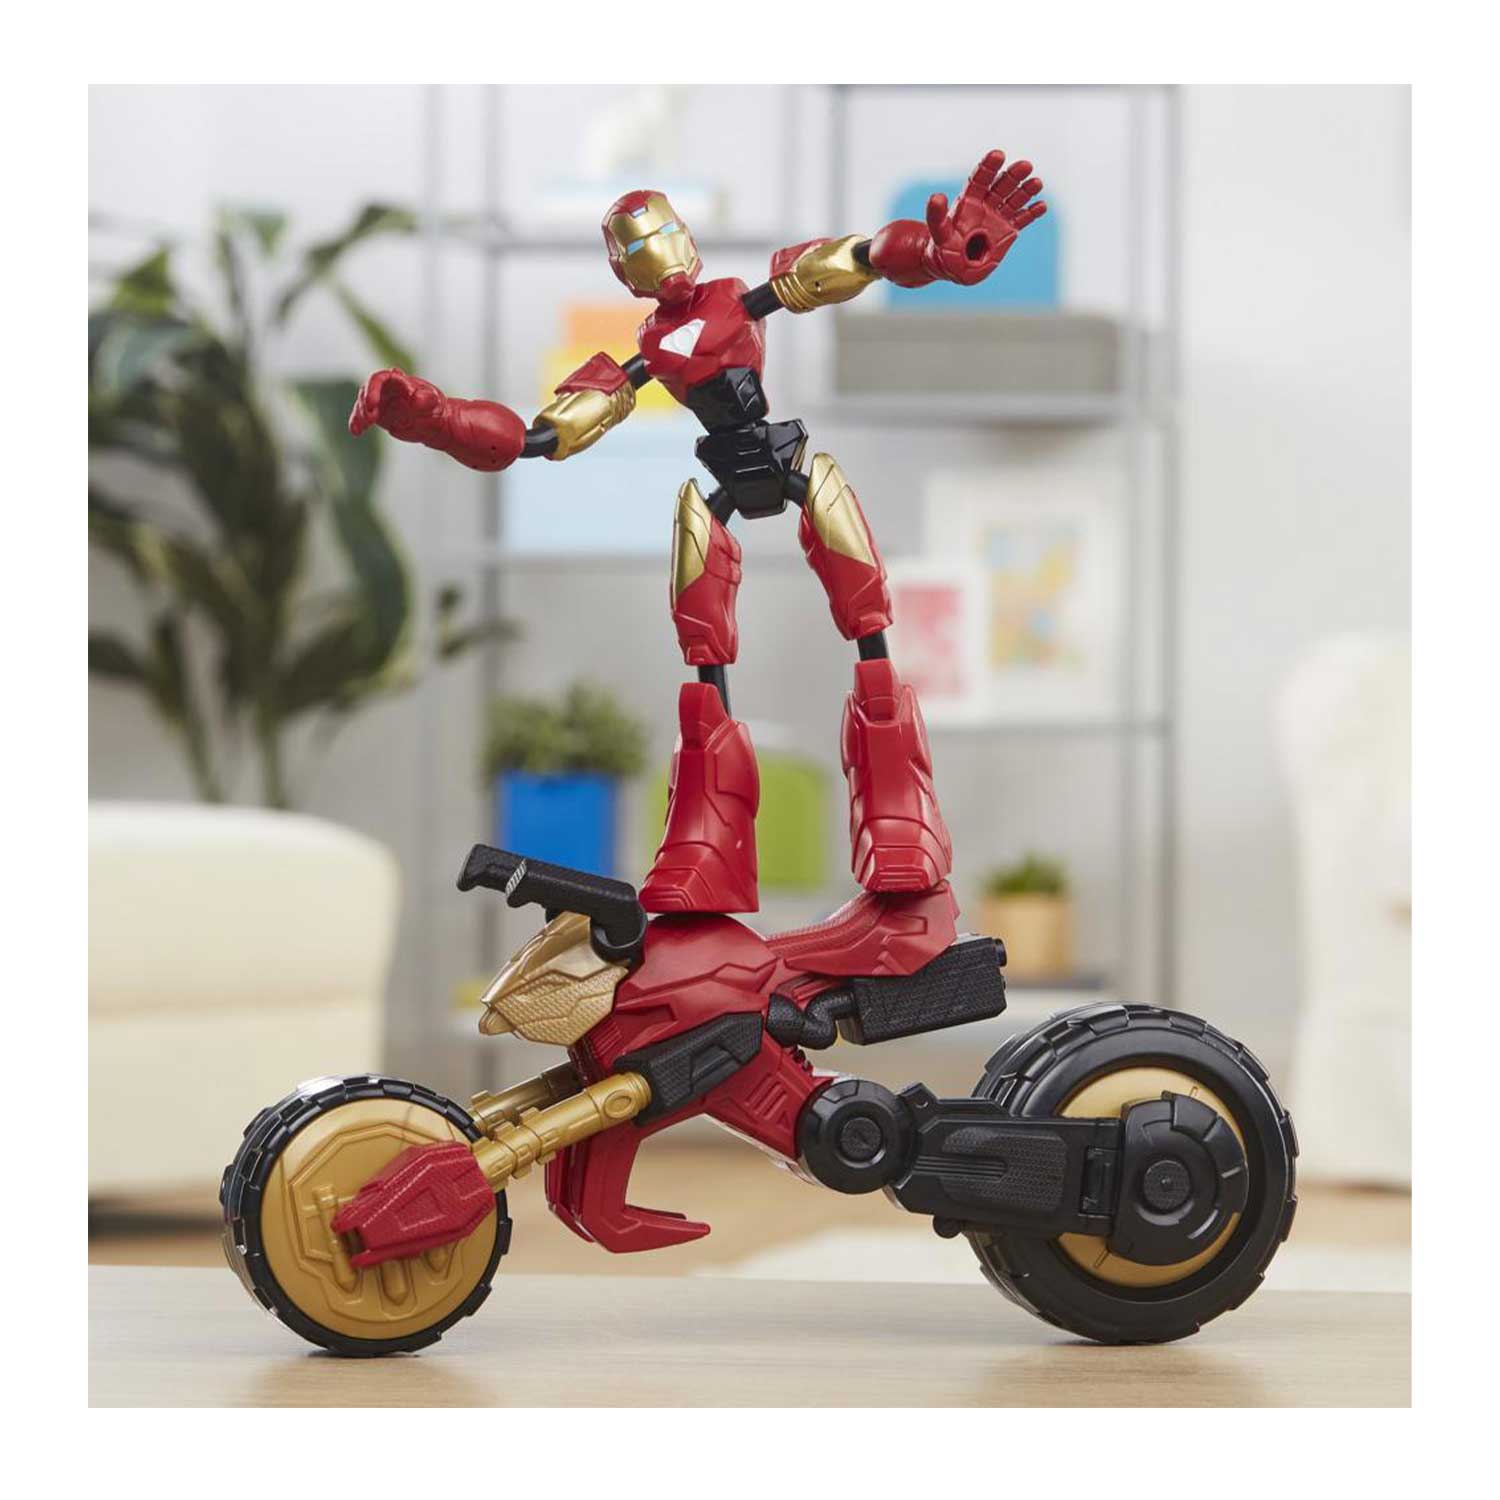 Marvel Bend and Flex, Flex Rider Iron Man Action Figure Toy, 6-Inch Figure and Motorcycle - Mod: HSBF02445L0